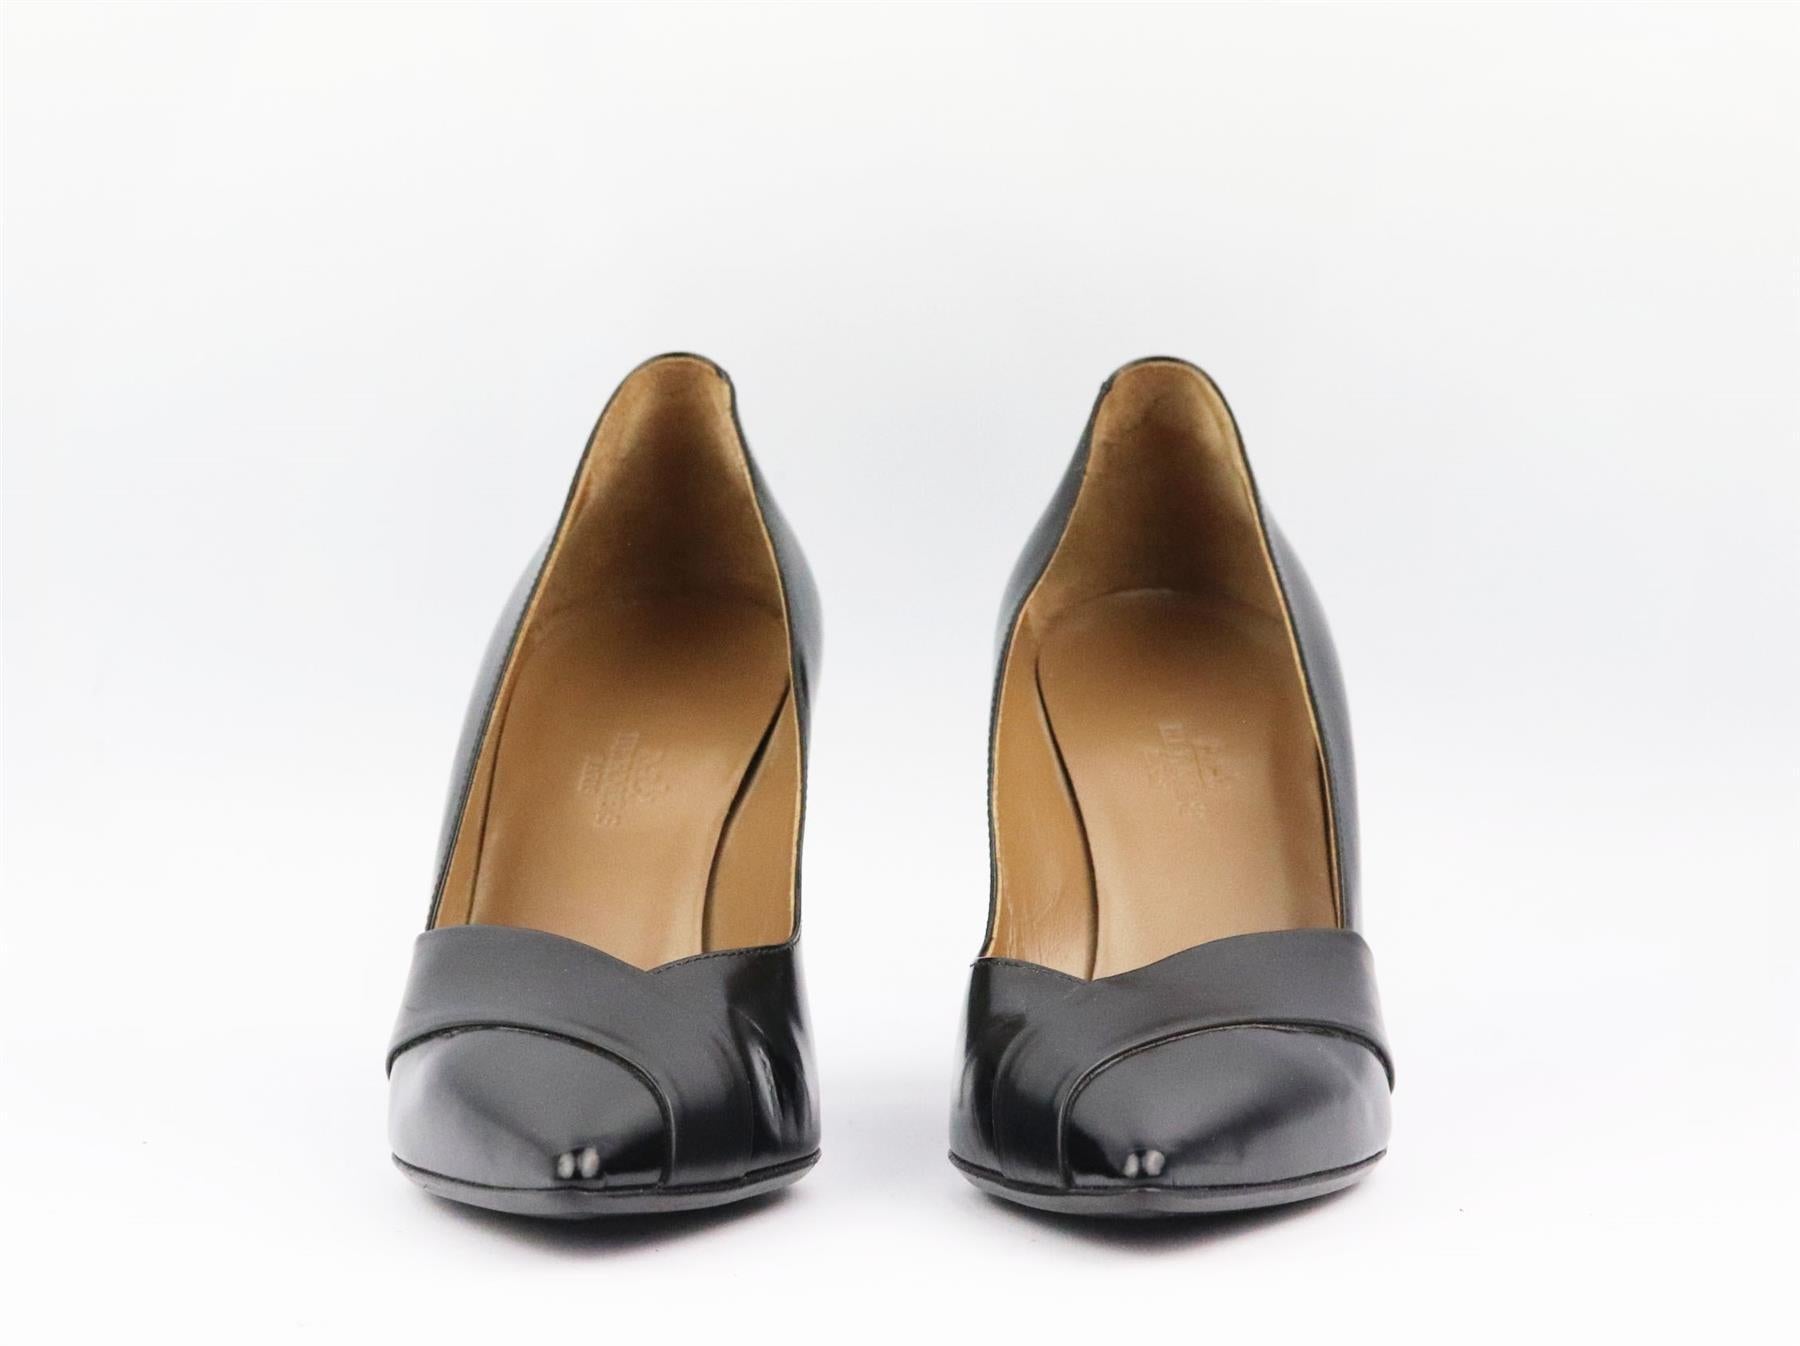 These pumps by Hermès are a classic style that will never date, made in Italy from supple black leather, they have sharp pointed toes and deep v to take you from morning meetings to dinner with friends. Heel measures approximately 63 mm/ 2.5 inches.